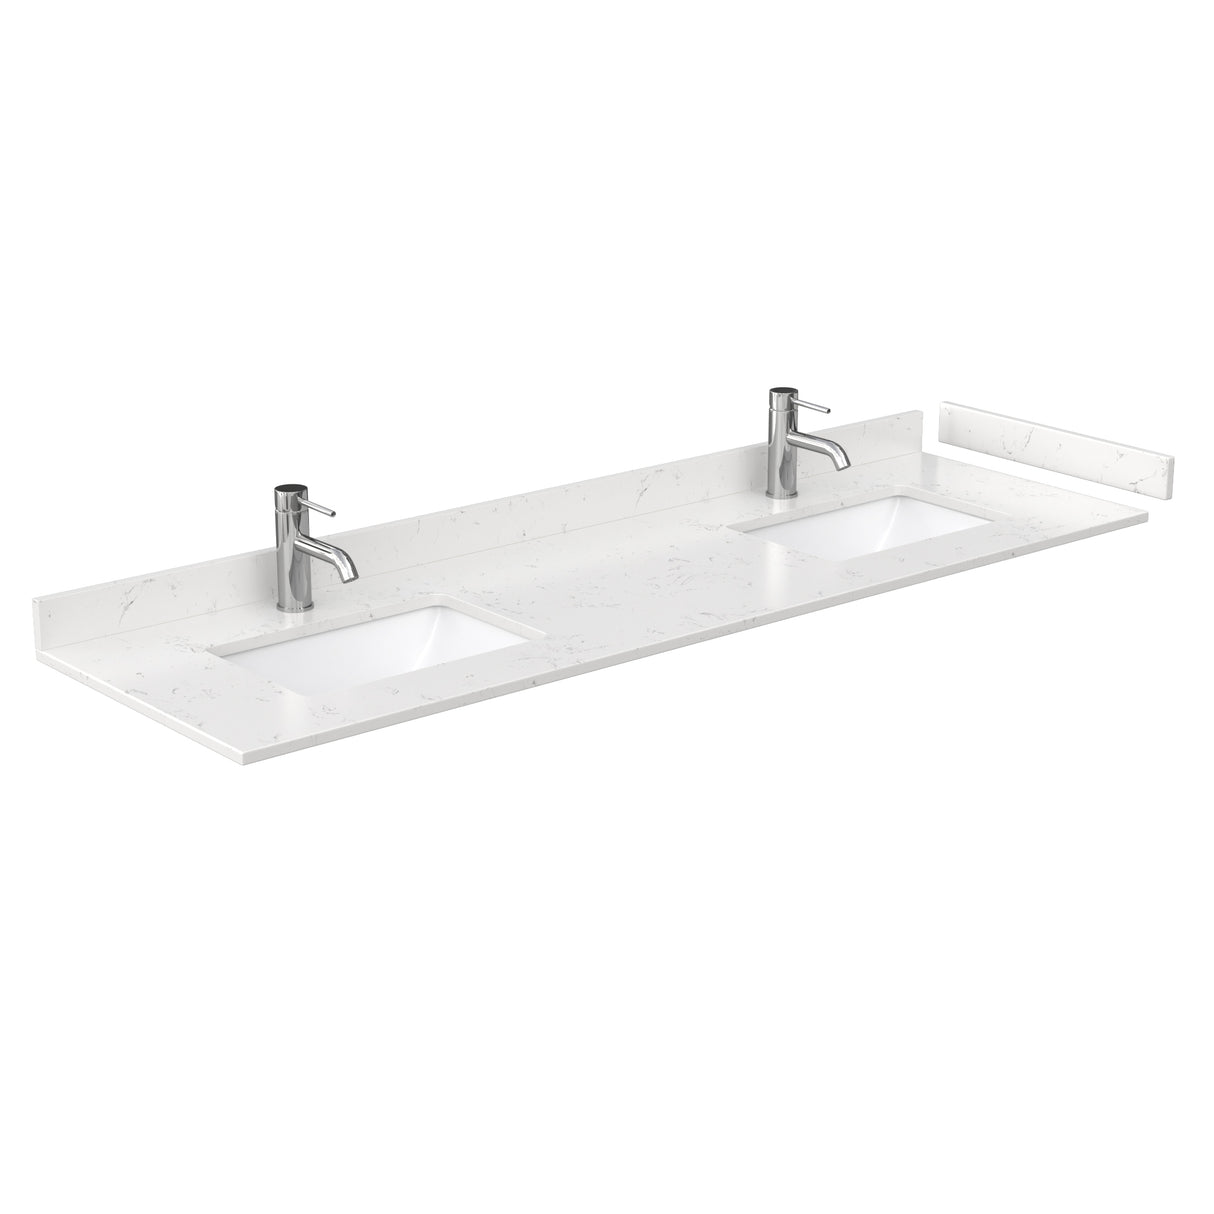 Sheffield 72 Inch Double Bathroom Vanity in White Carrara Cultured Marble Countertop Undermount Square Sinks No Mirror